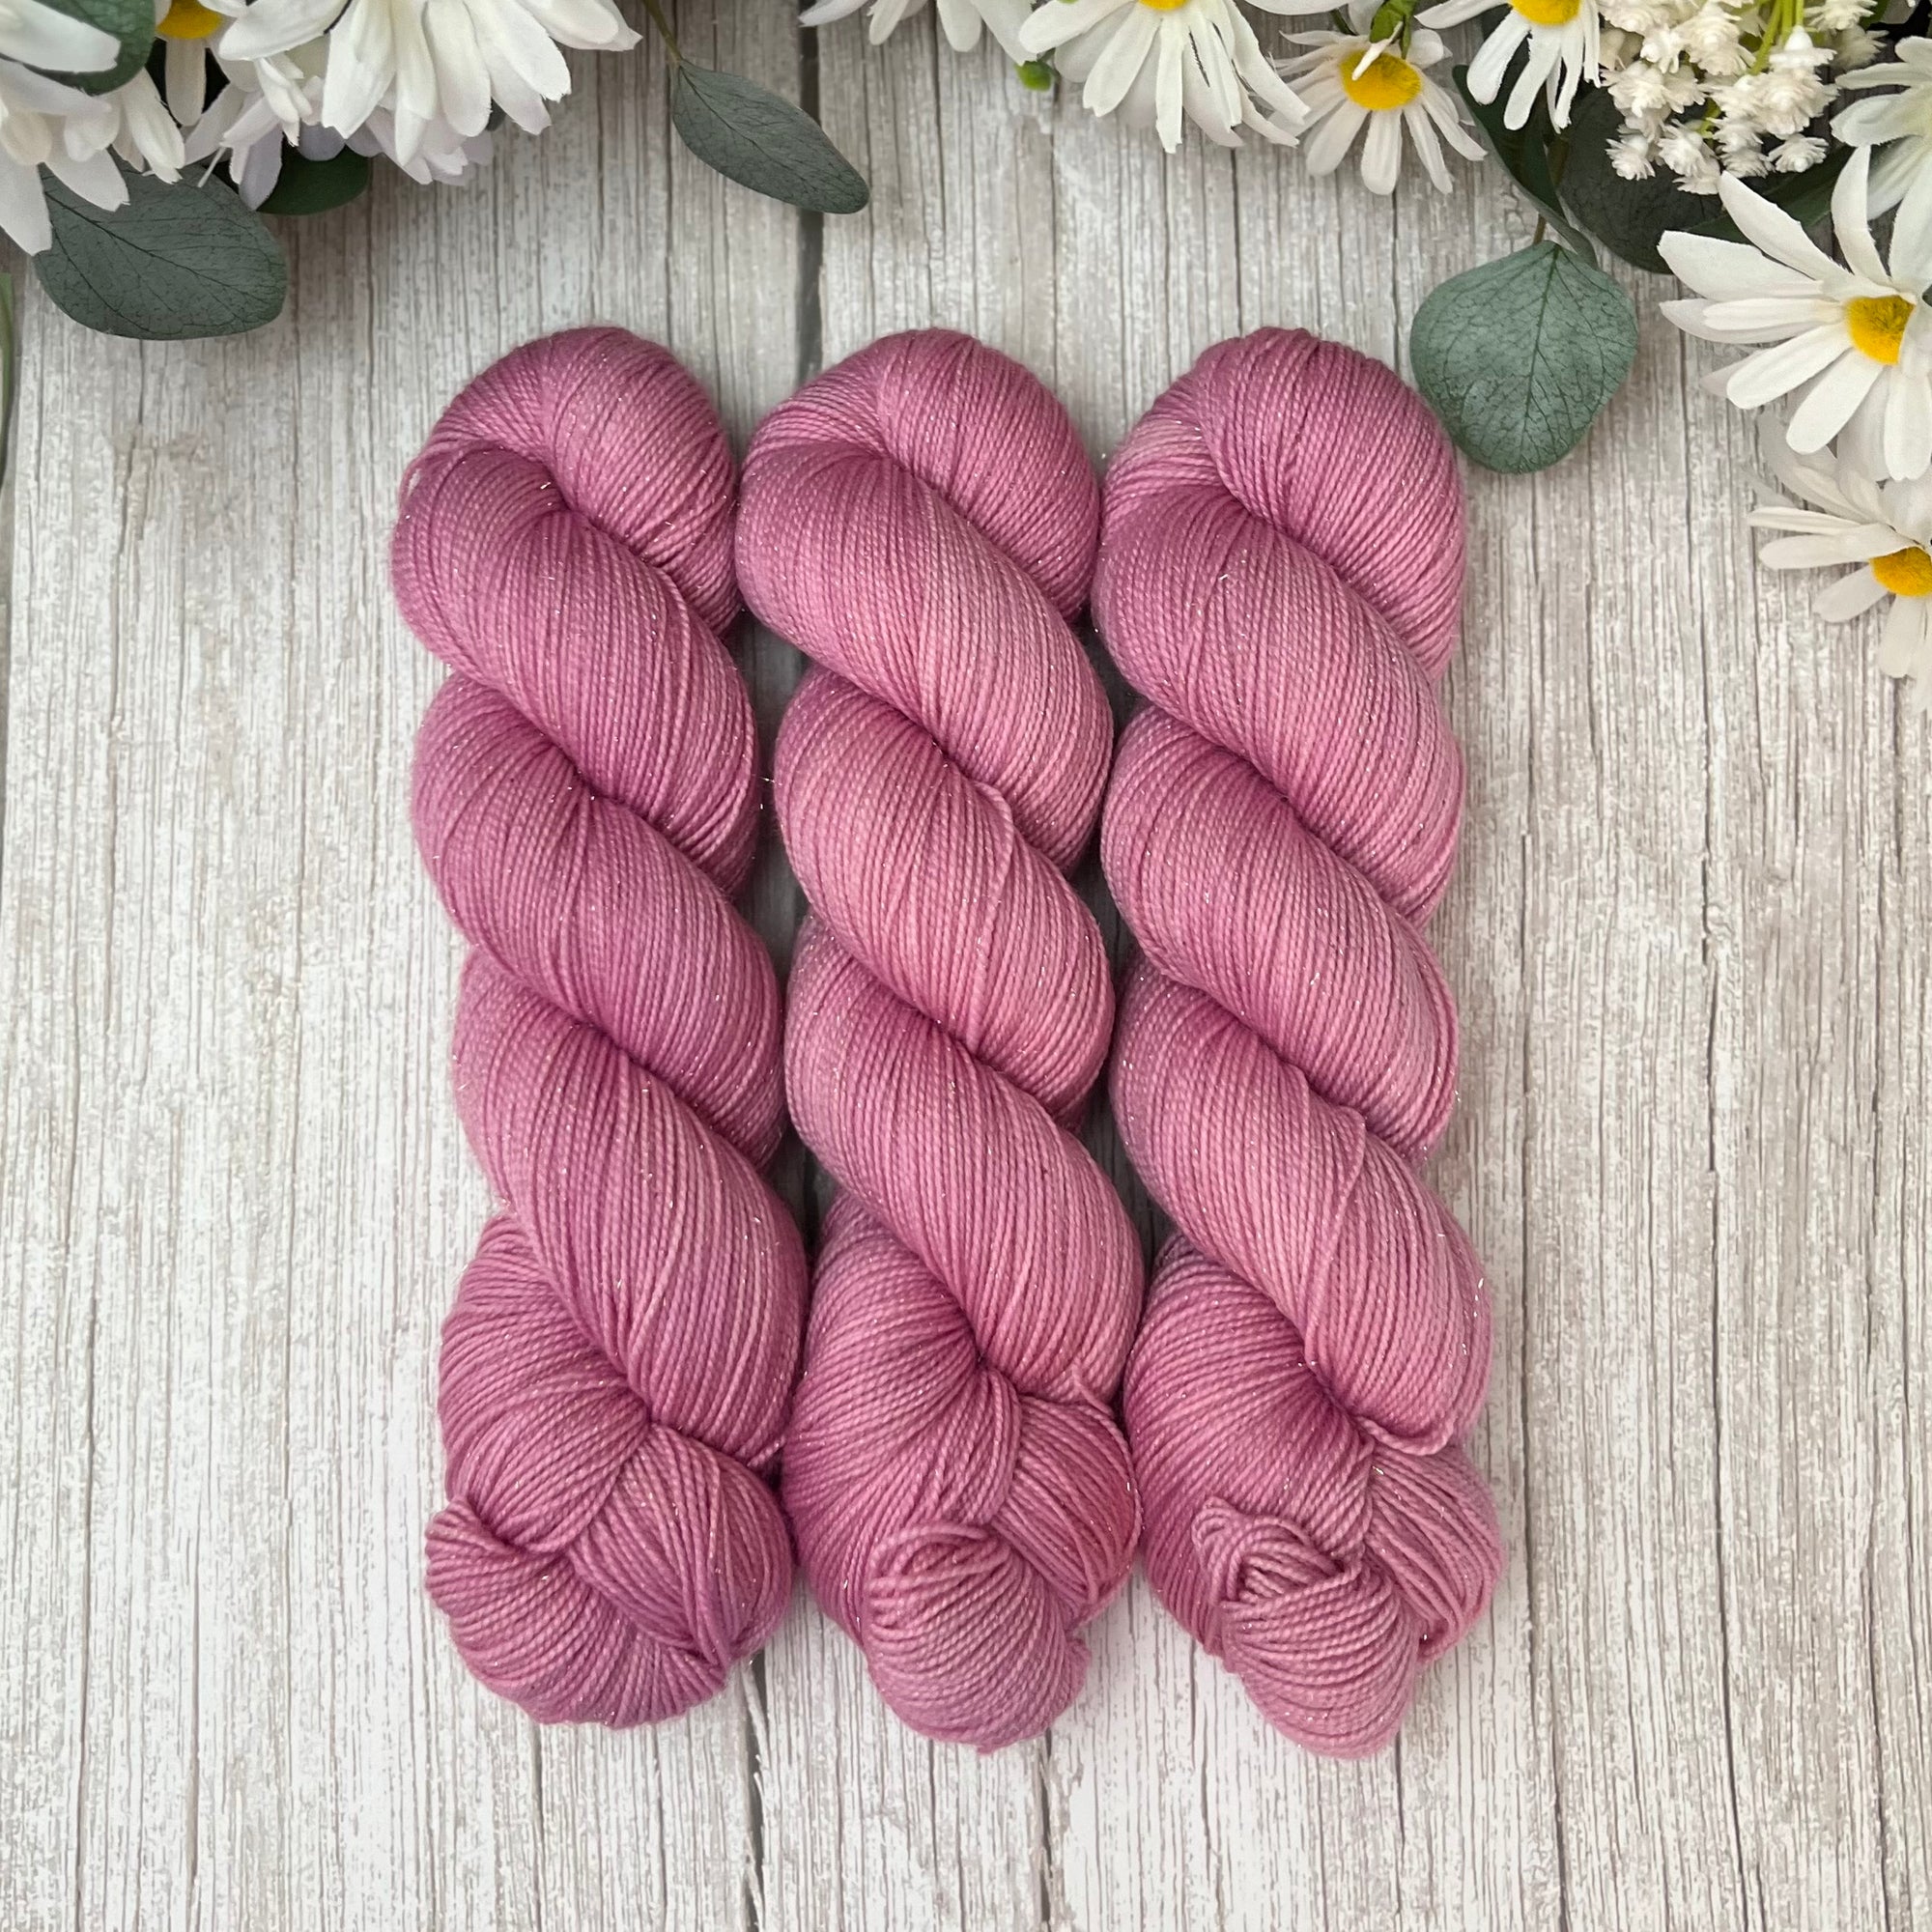 "Be My Valentine" Deluxe Sparkle Fingering Hand-dyed Yarn